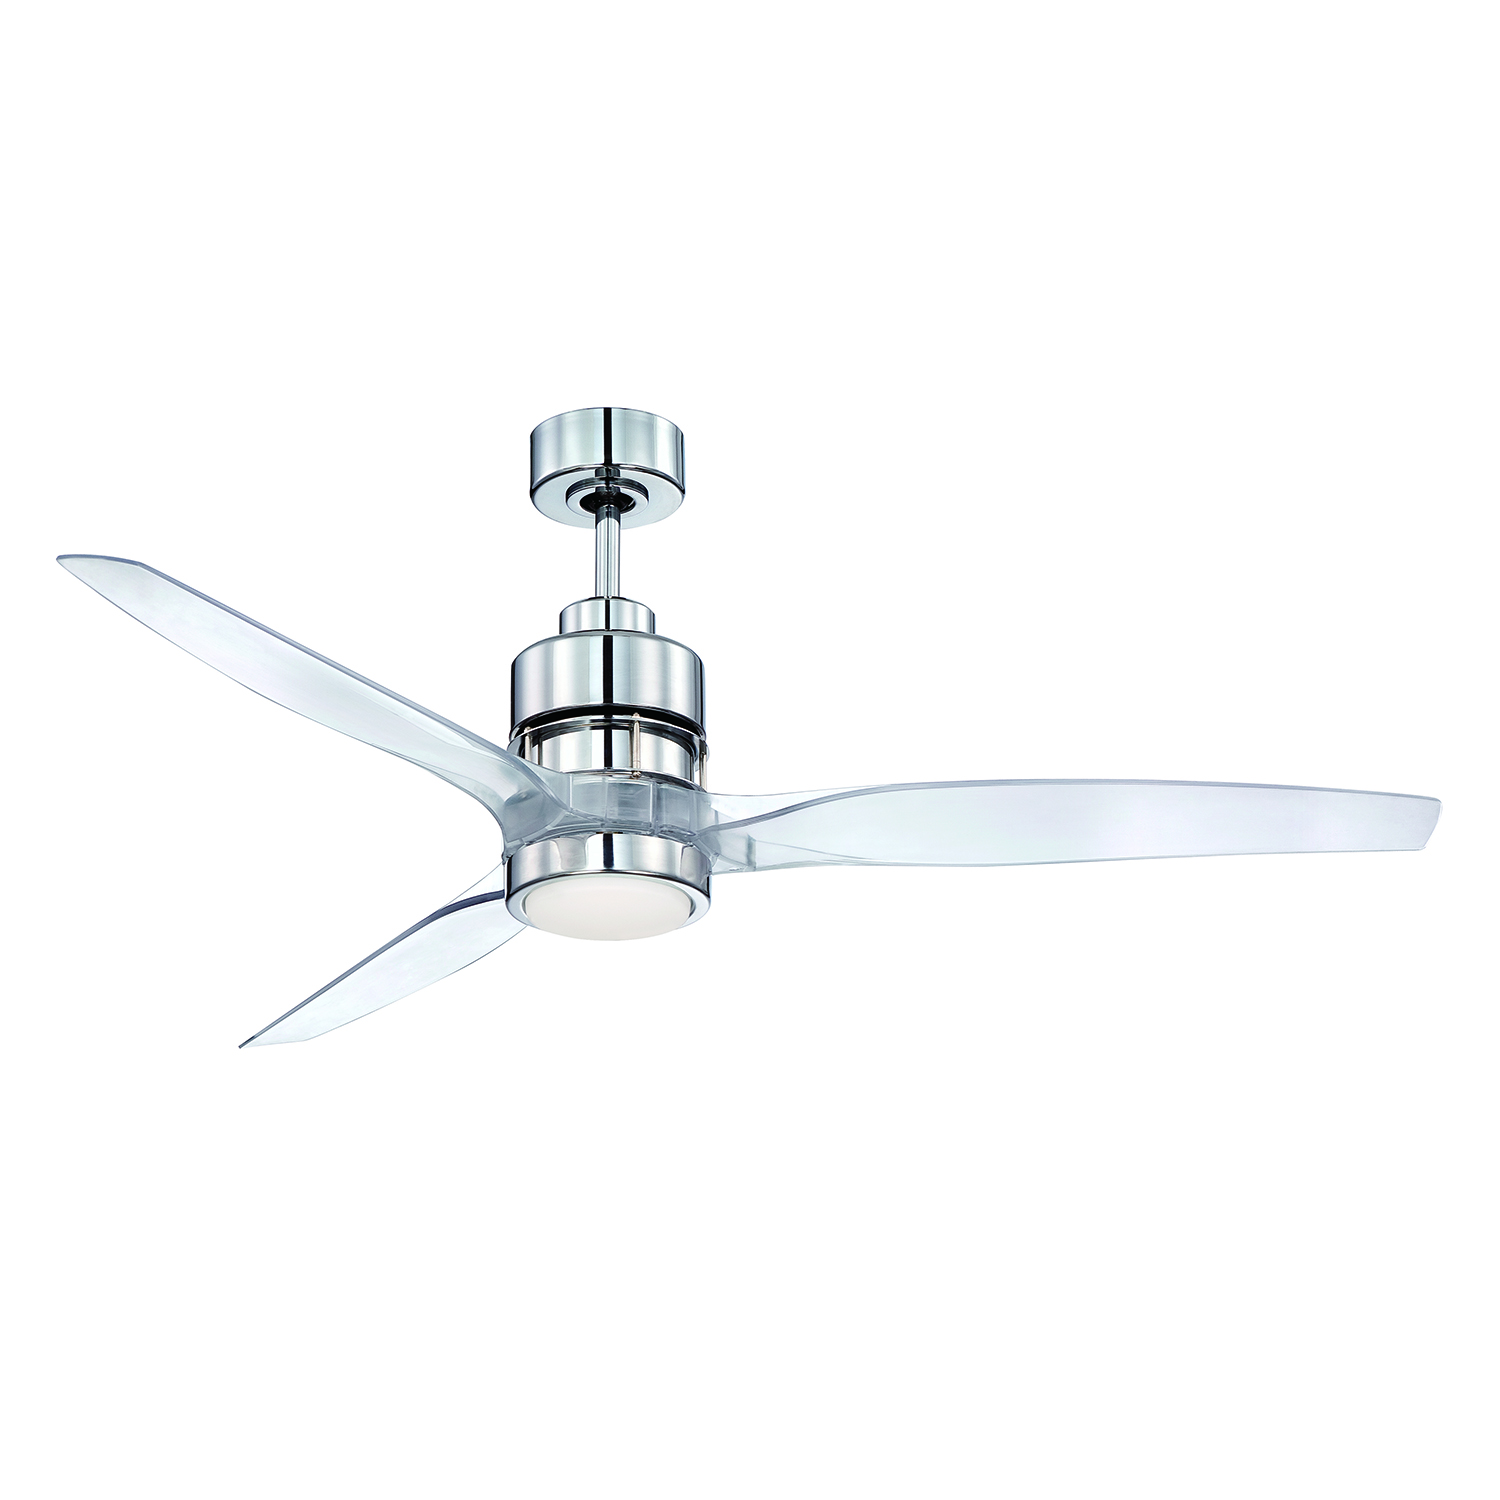 Craftmade Lighting-K11067-Sonnet - 52 Inch Ceiling Fan with Light Kit   Chrome Finish with Clear Acrylic Blade Finish with White Frost Glass